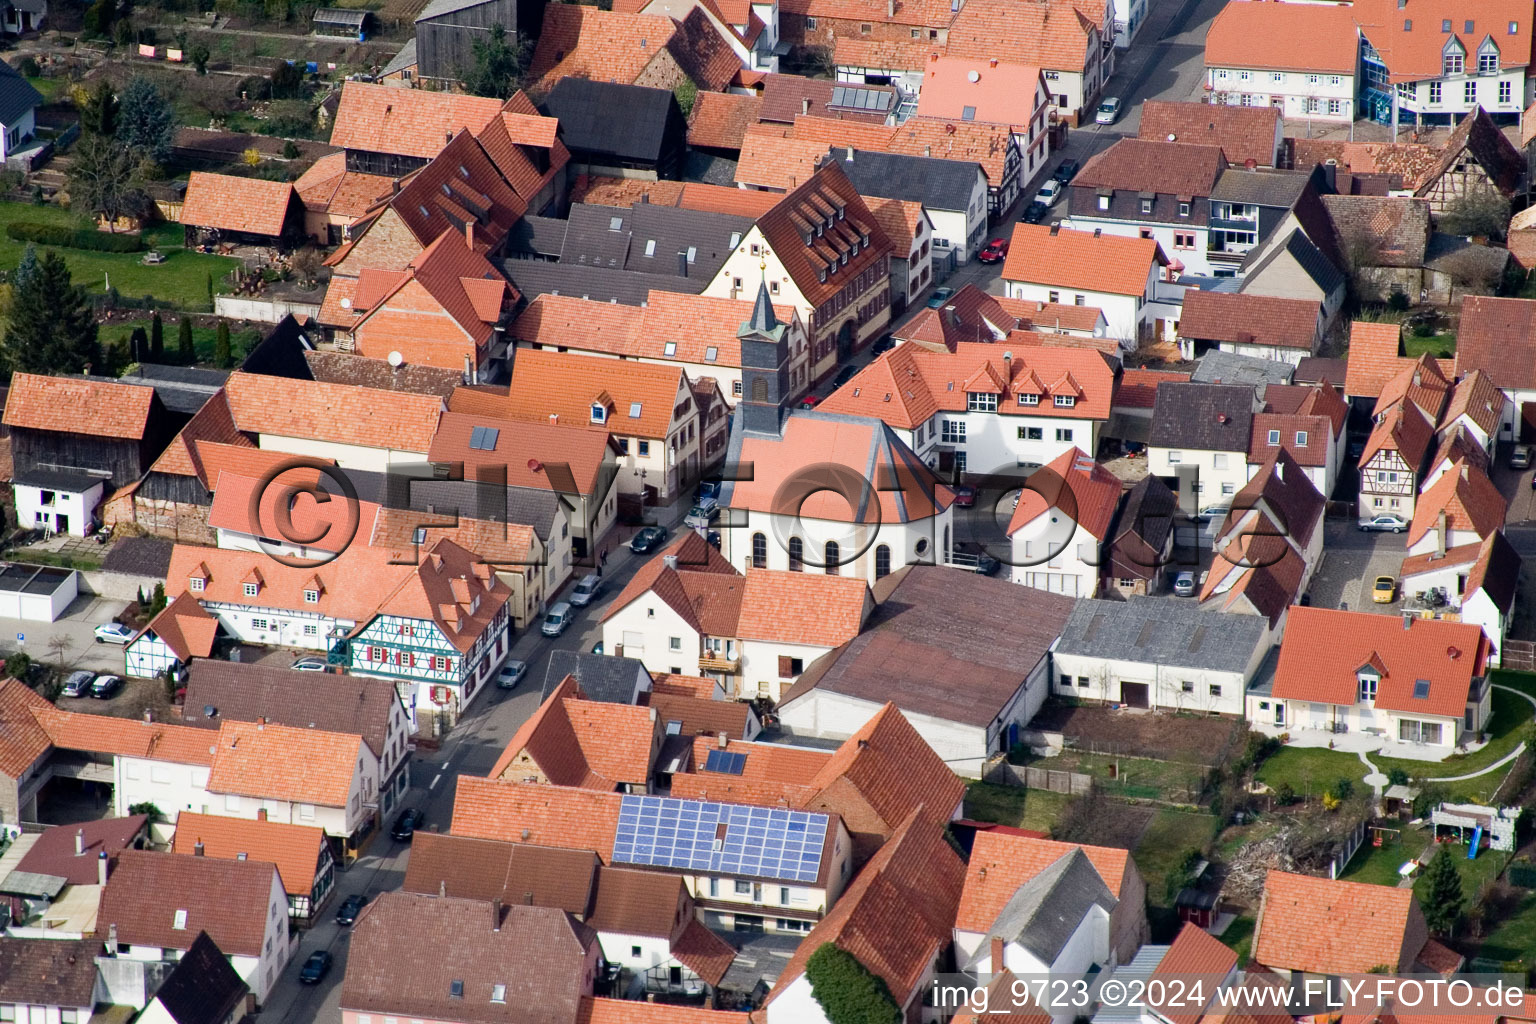 Aerial view of Hauptstr in Offenbach an der Queich in the state Rhineland-Palatinate, Germany